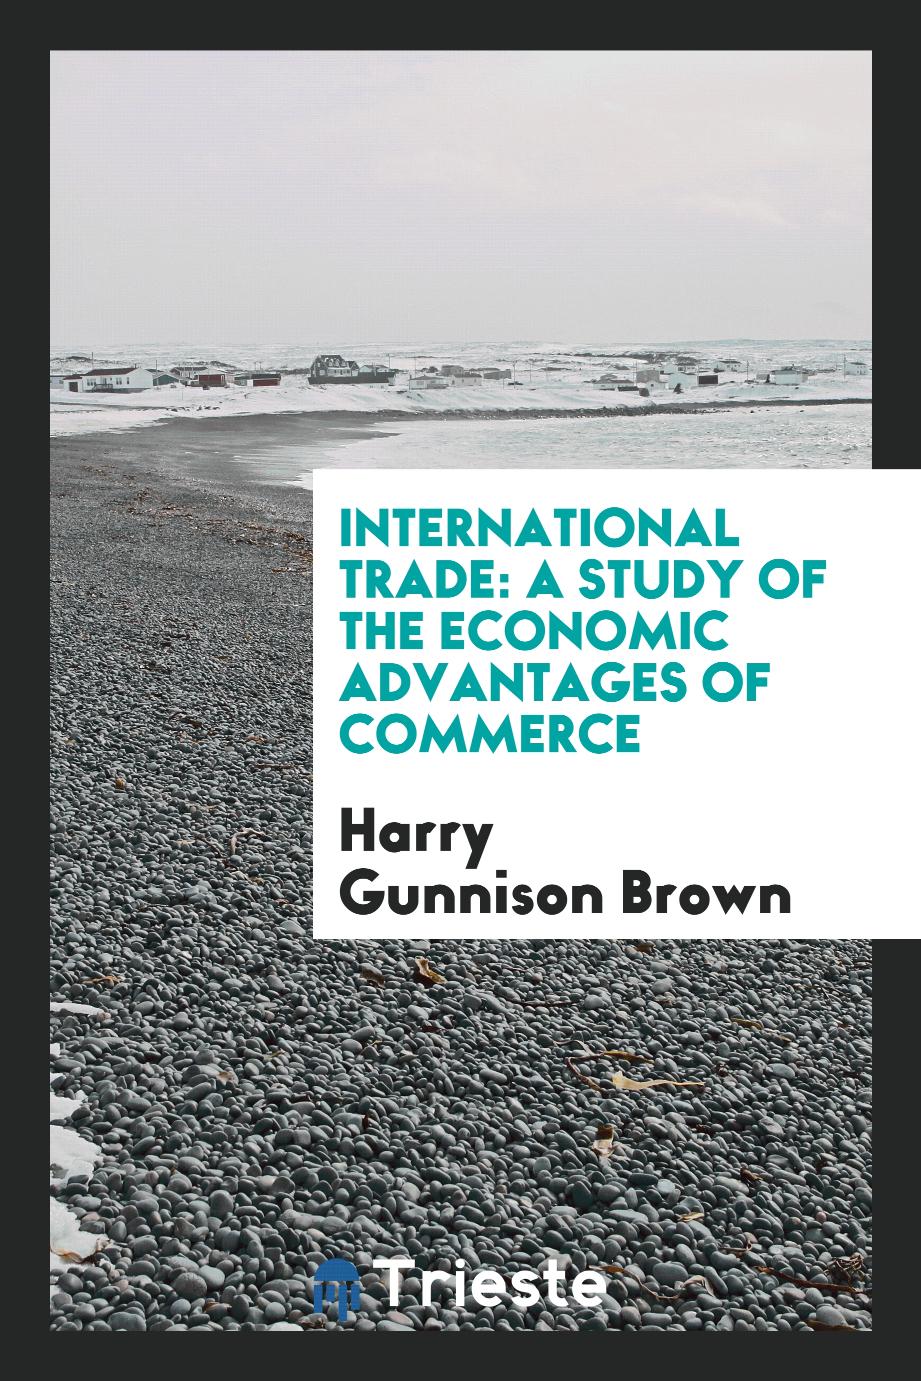 International Trade: A Study of the Economic Advantages of Commerce